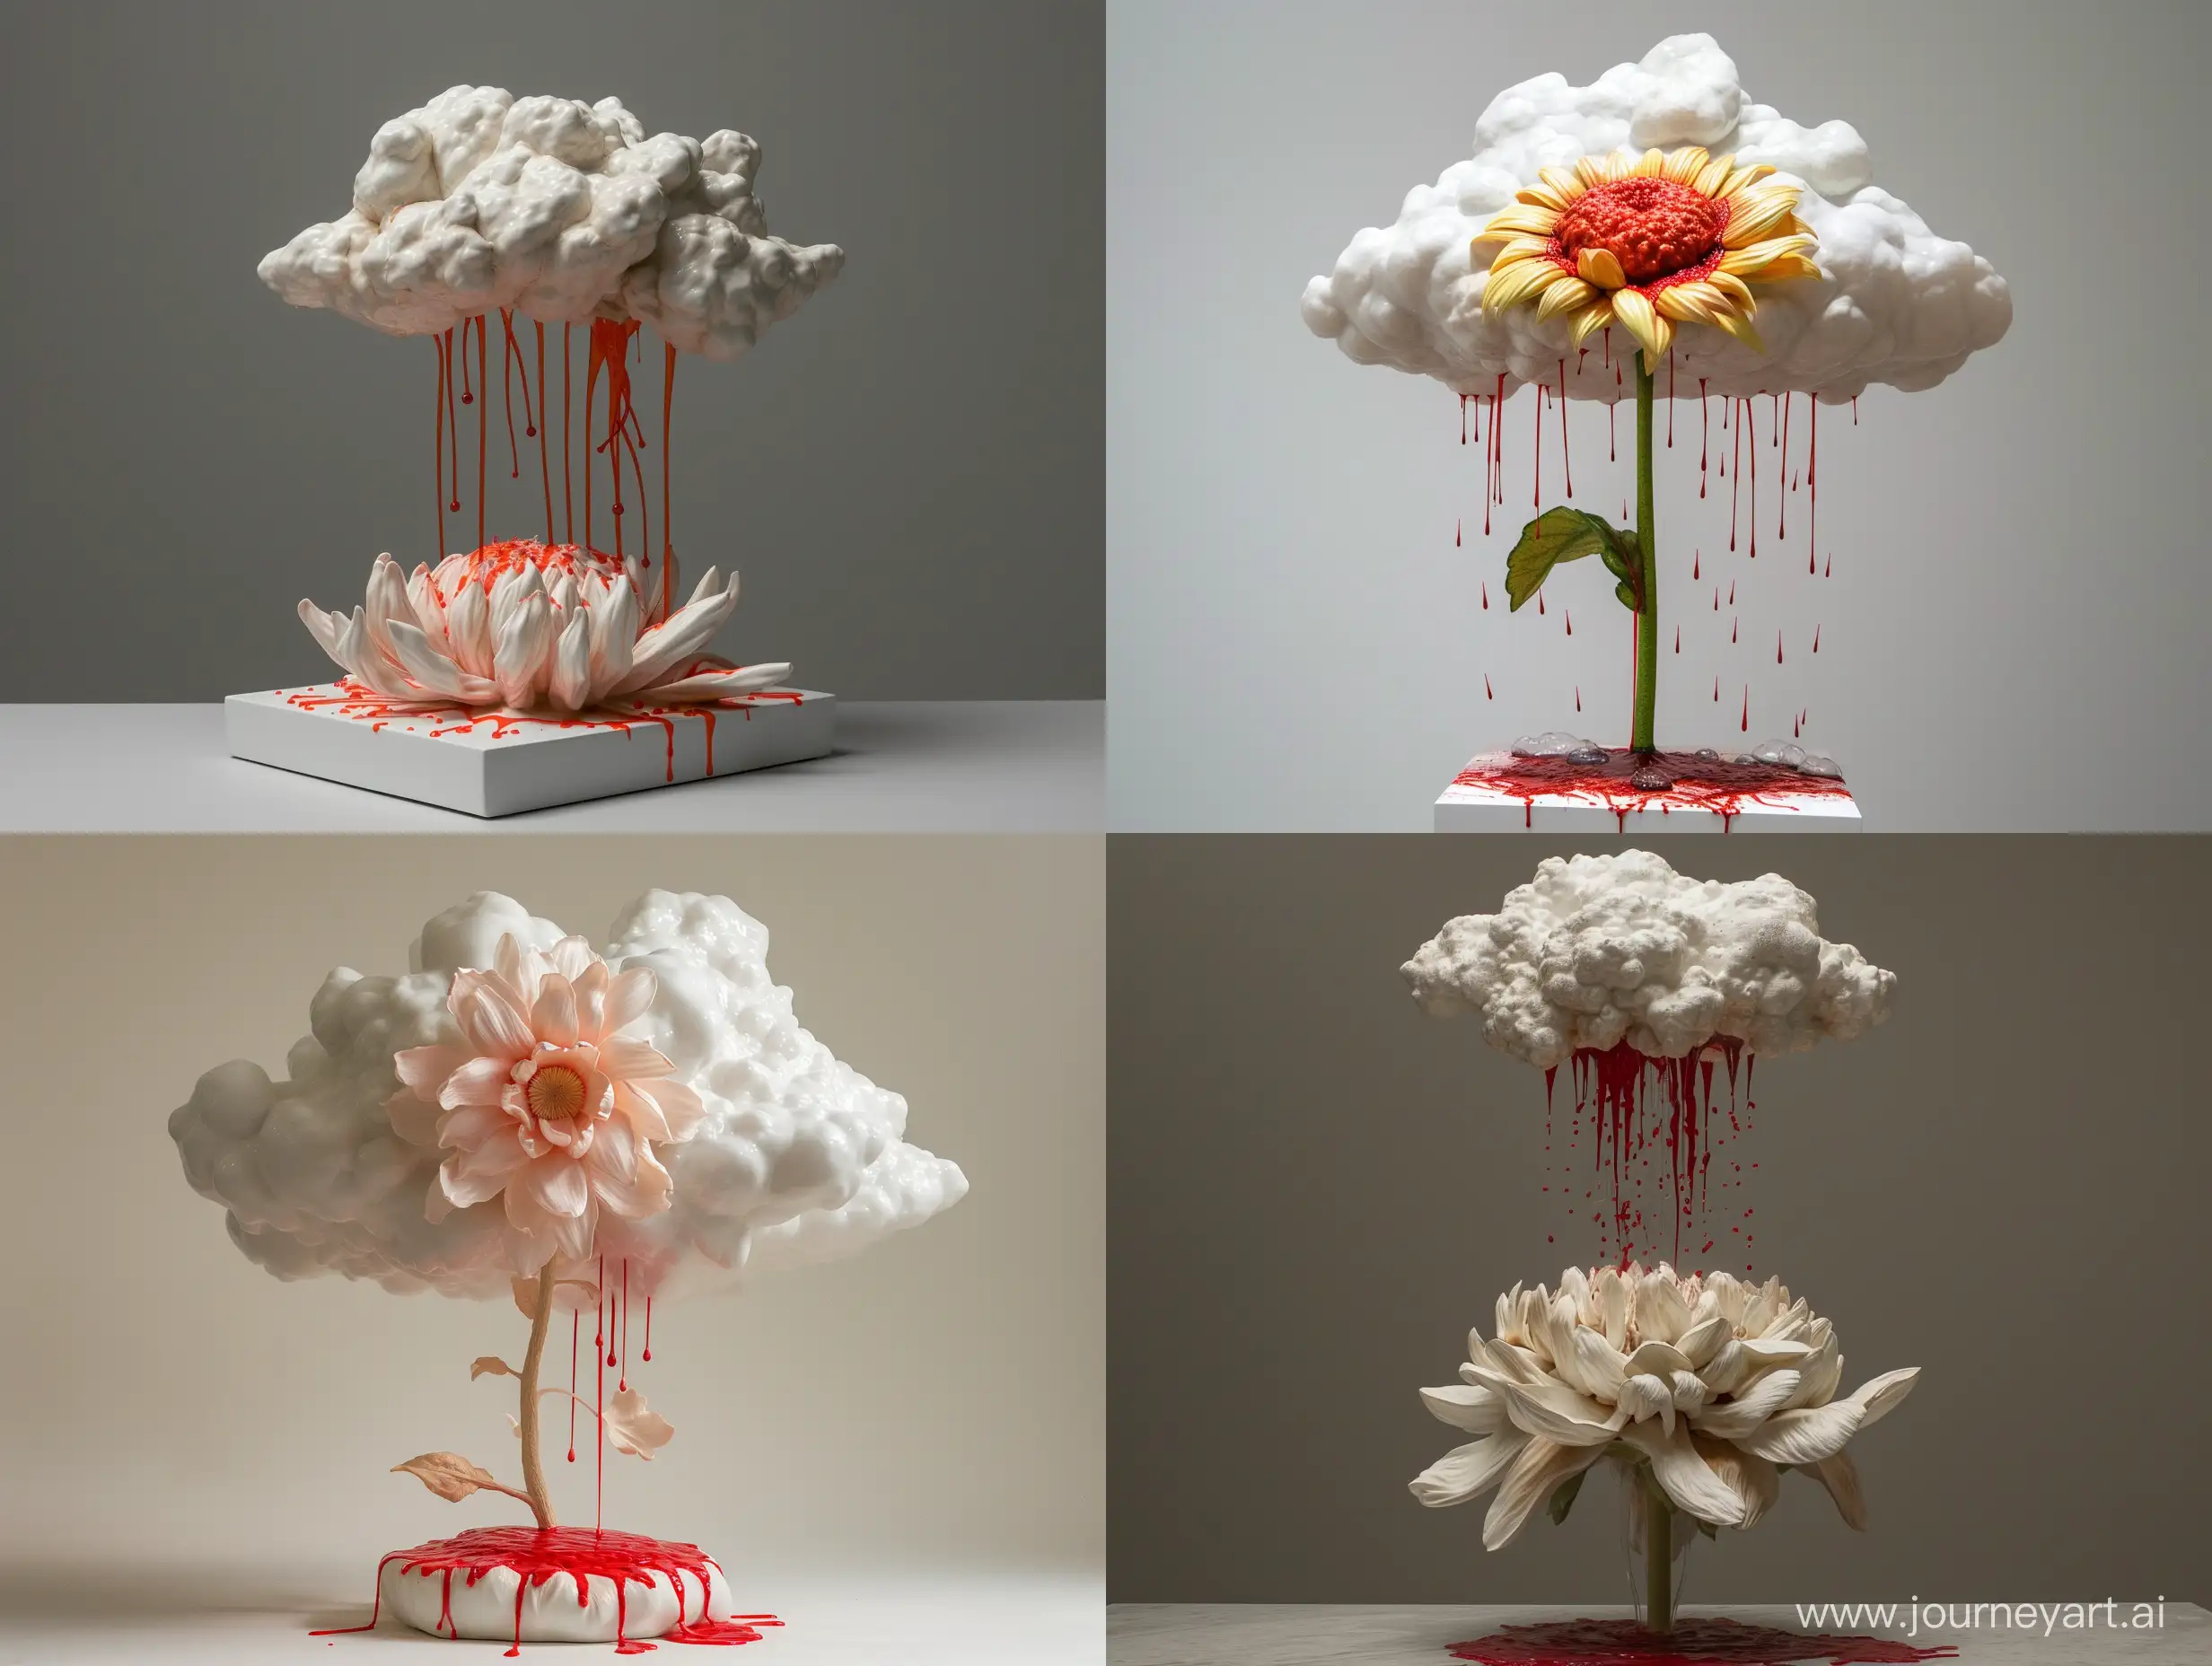 sculpture in the style of Jeff Koons: a flower above which is a cloud and red rain pours from the cloud. photorealism